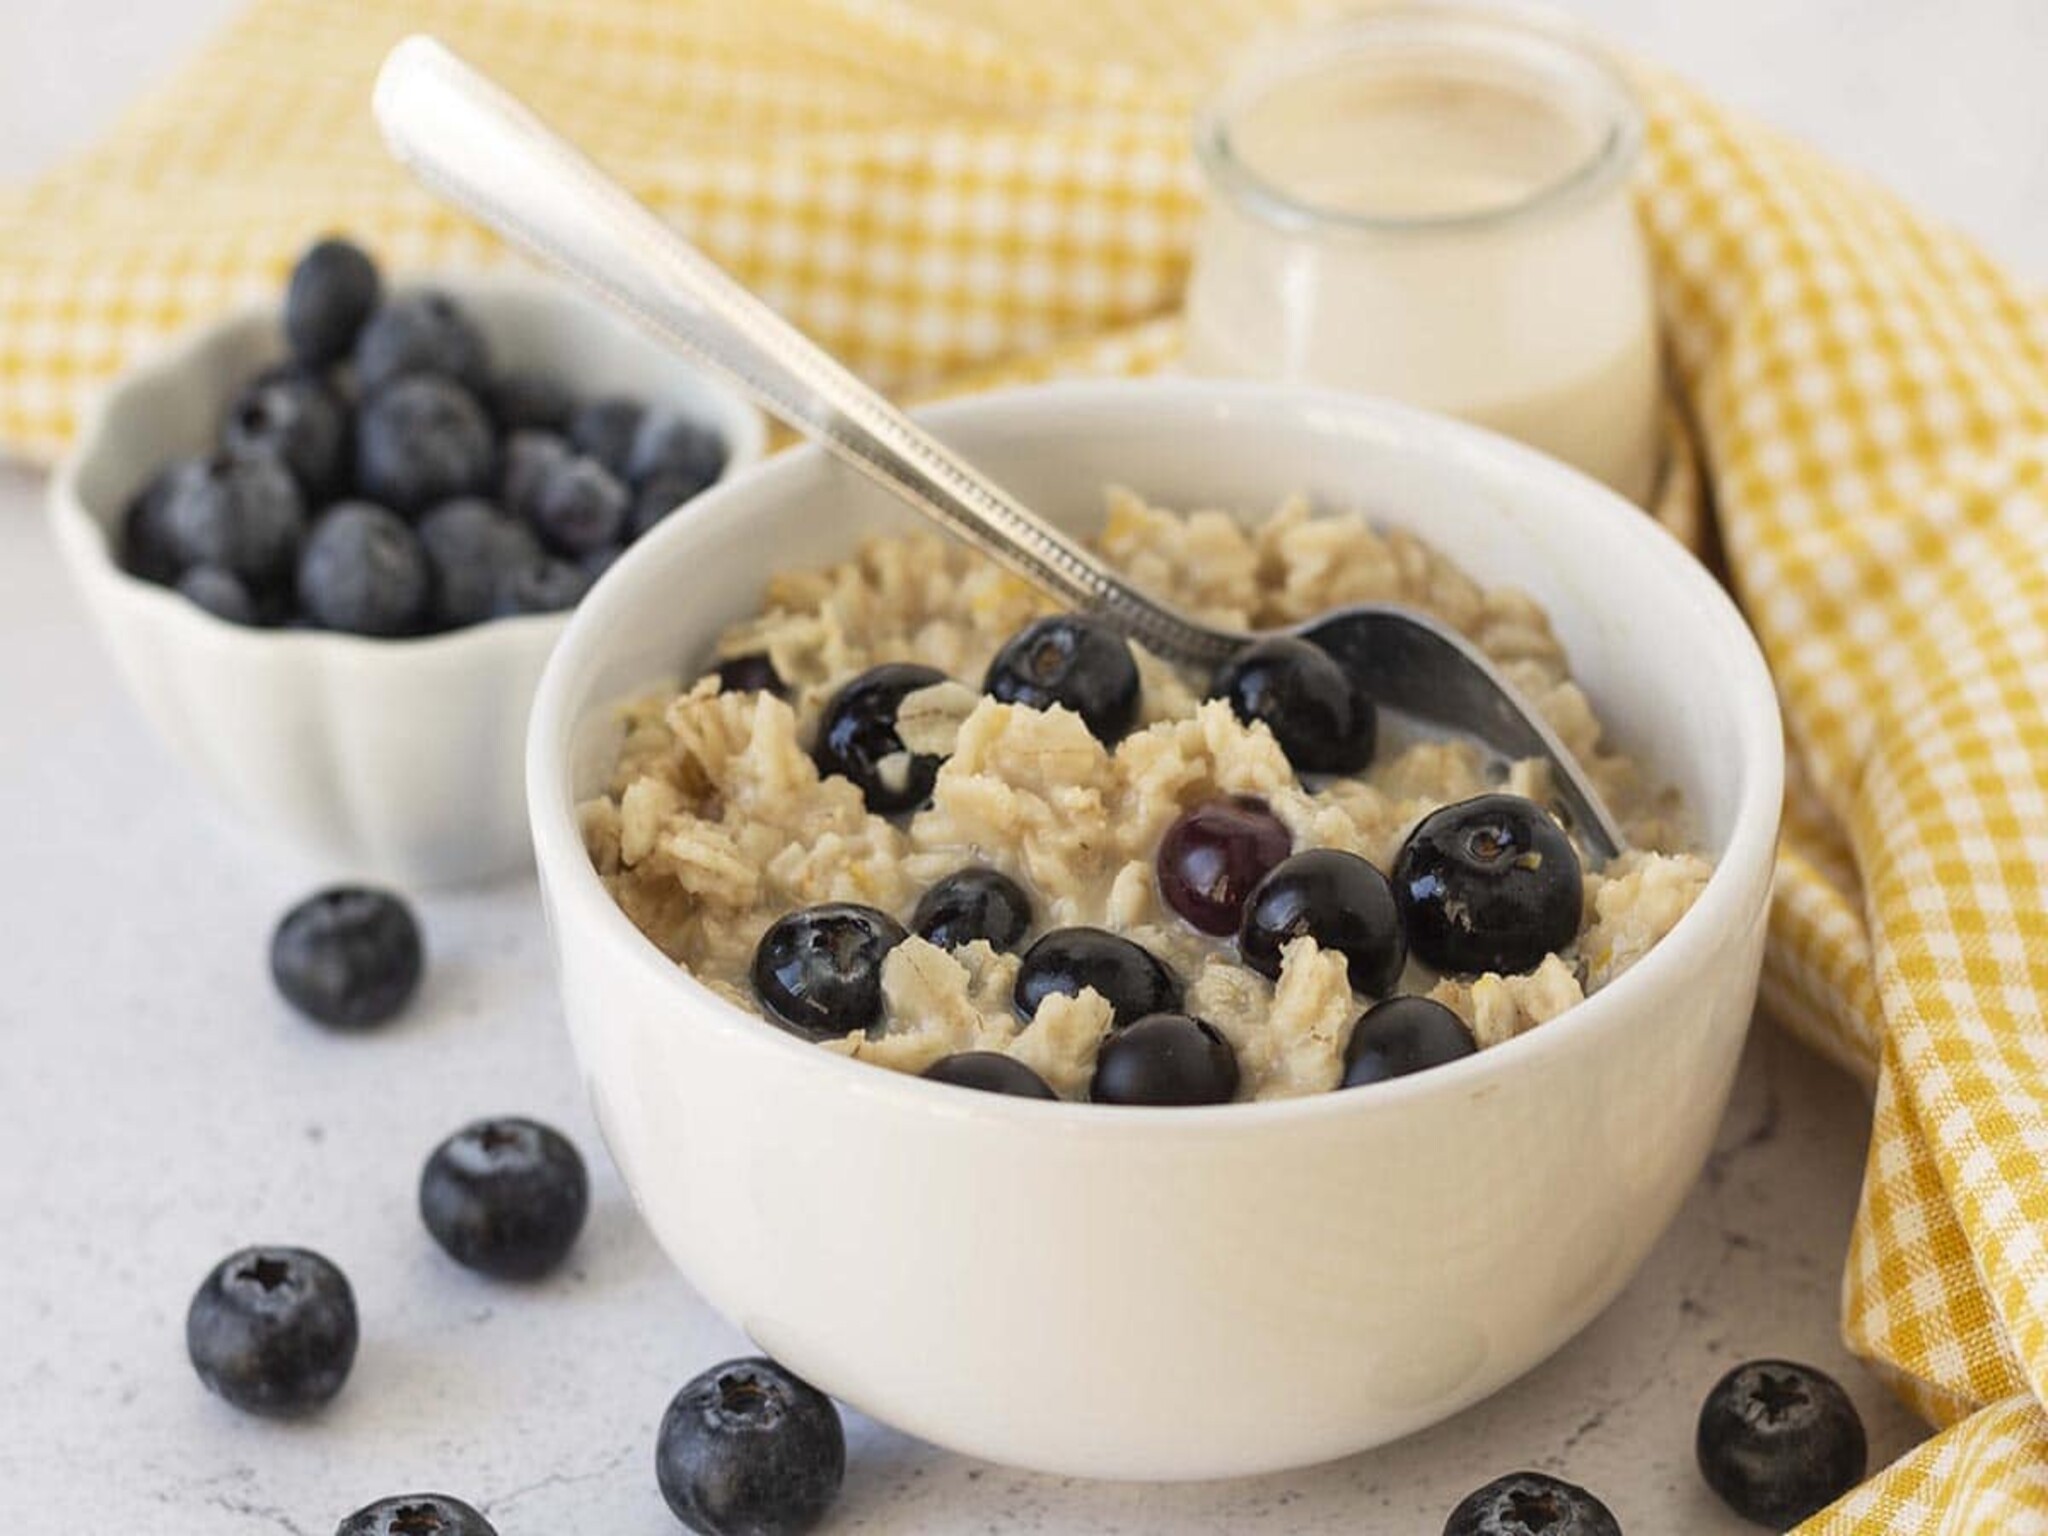 "A Healthy Breakfast: Oatmeal with Blueberries"